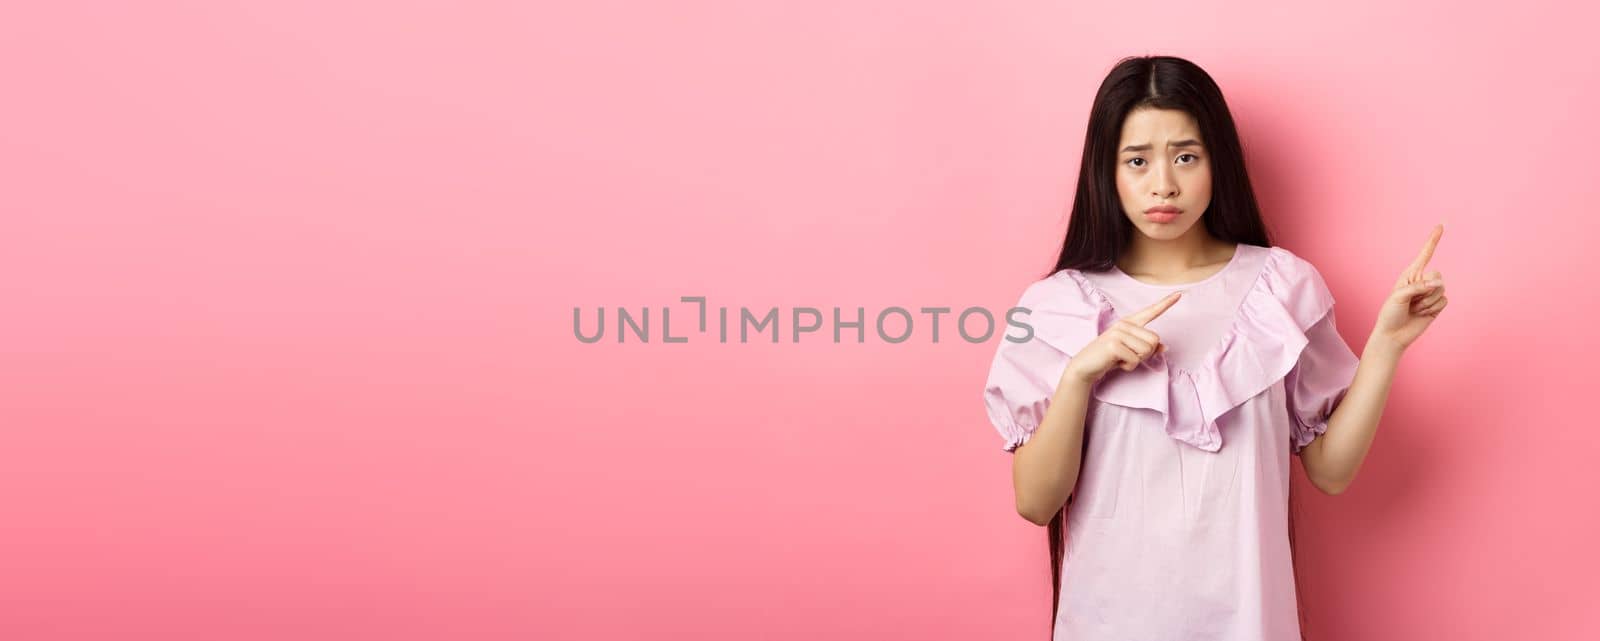 Sad and distressed asian girl frowning, sulking and pointing fingers right at disappointing bad news, feeling unhappy, standing against pink background.